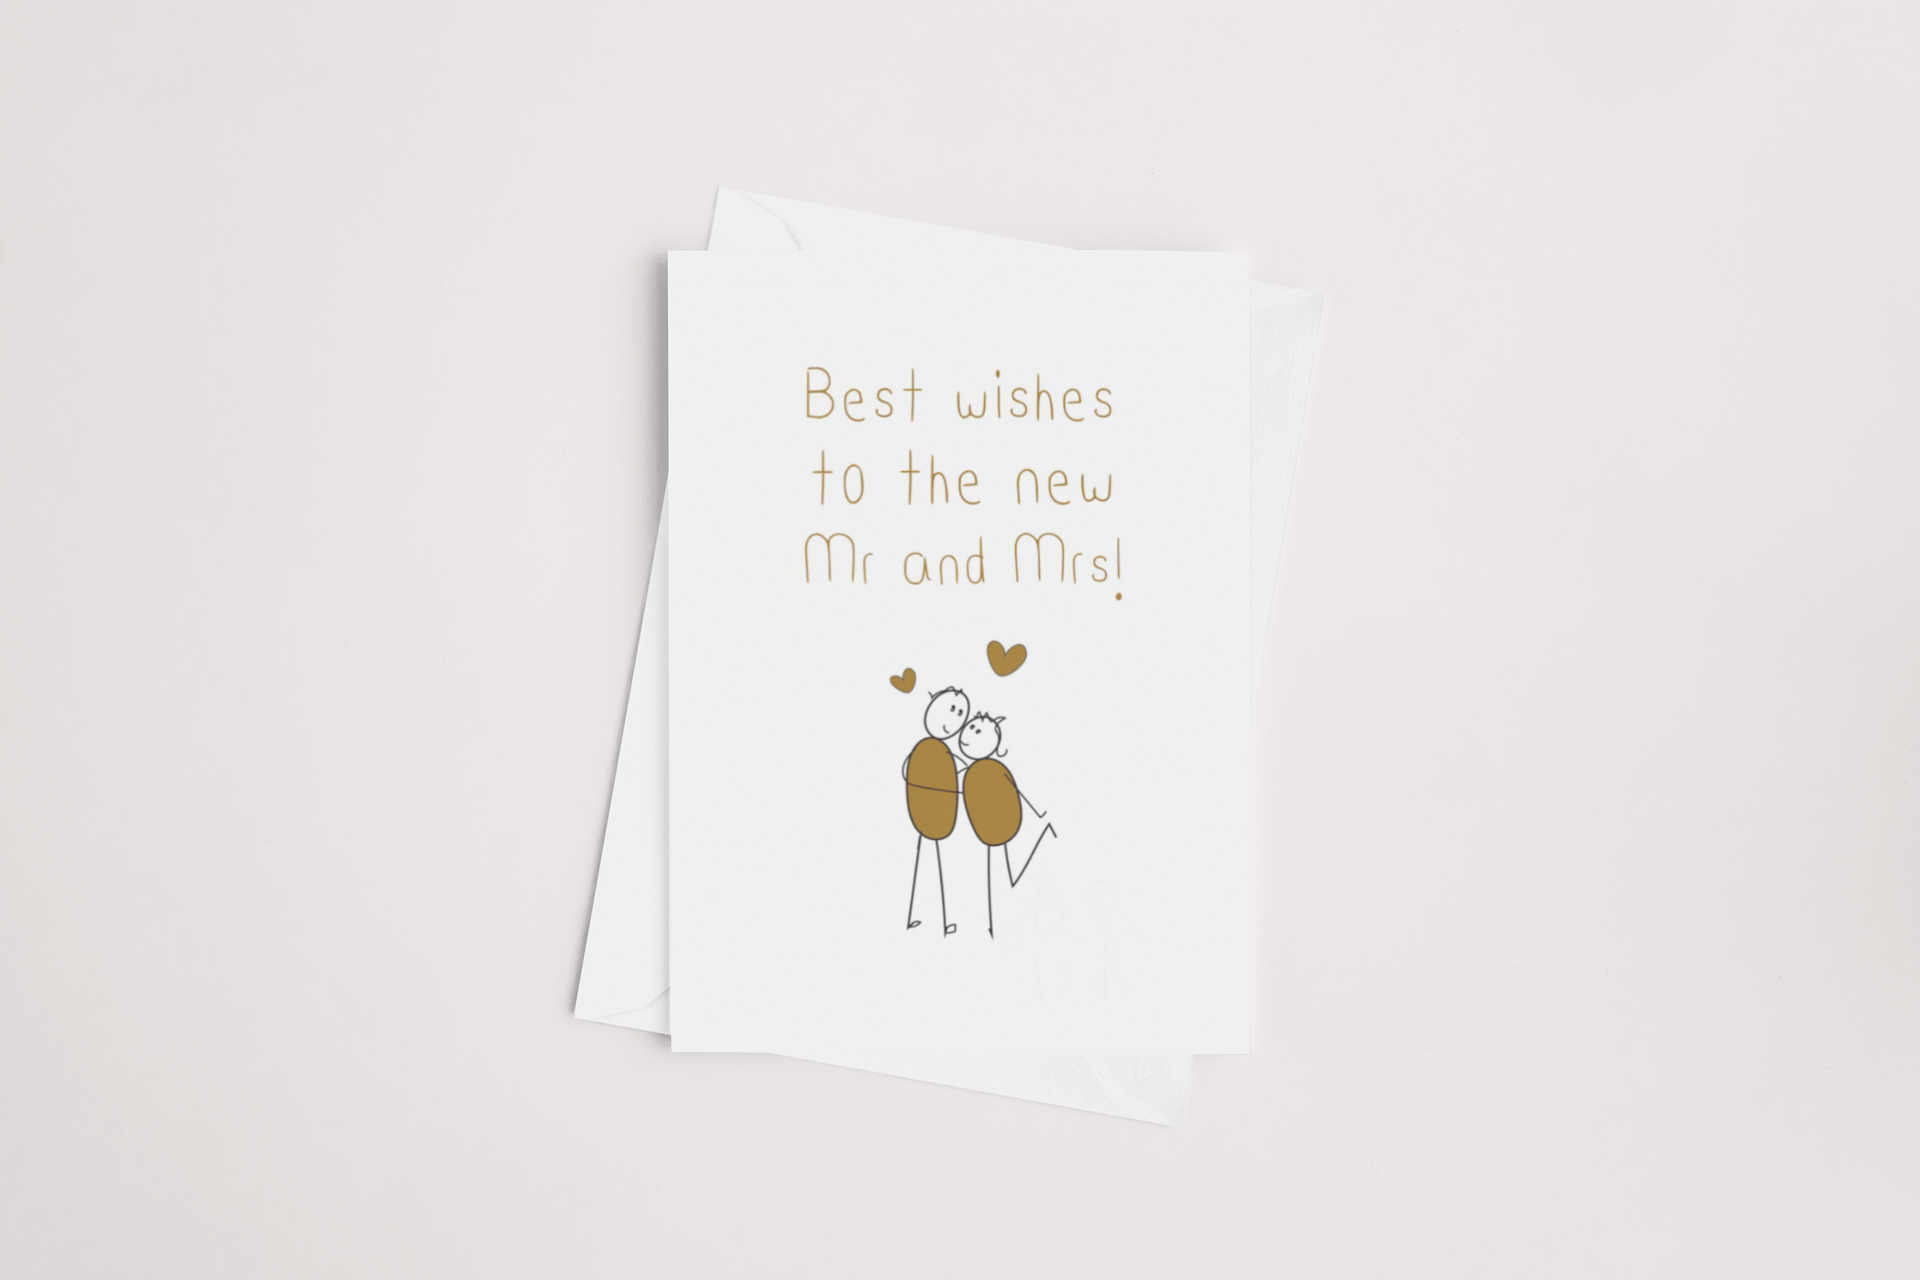 A Mr & Mrs Card by icandy with the message "best wishes to the new mr and mrs!" featuring an illustration of two cute characters holding hands with a heart above them, product of New Zealand.